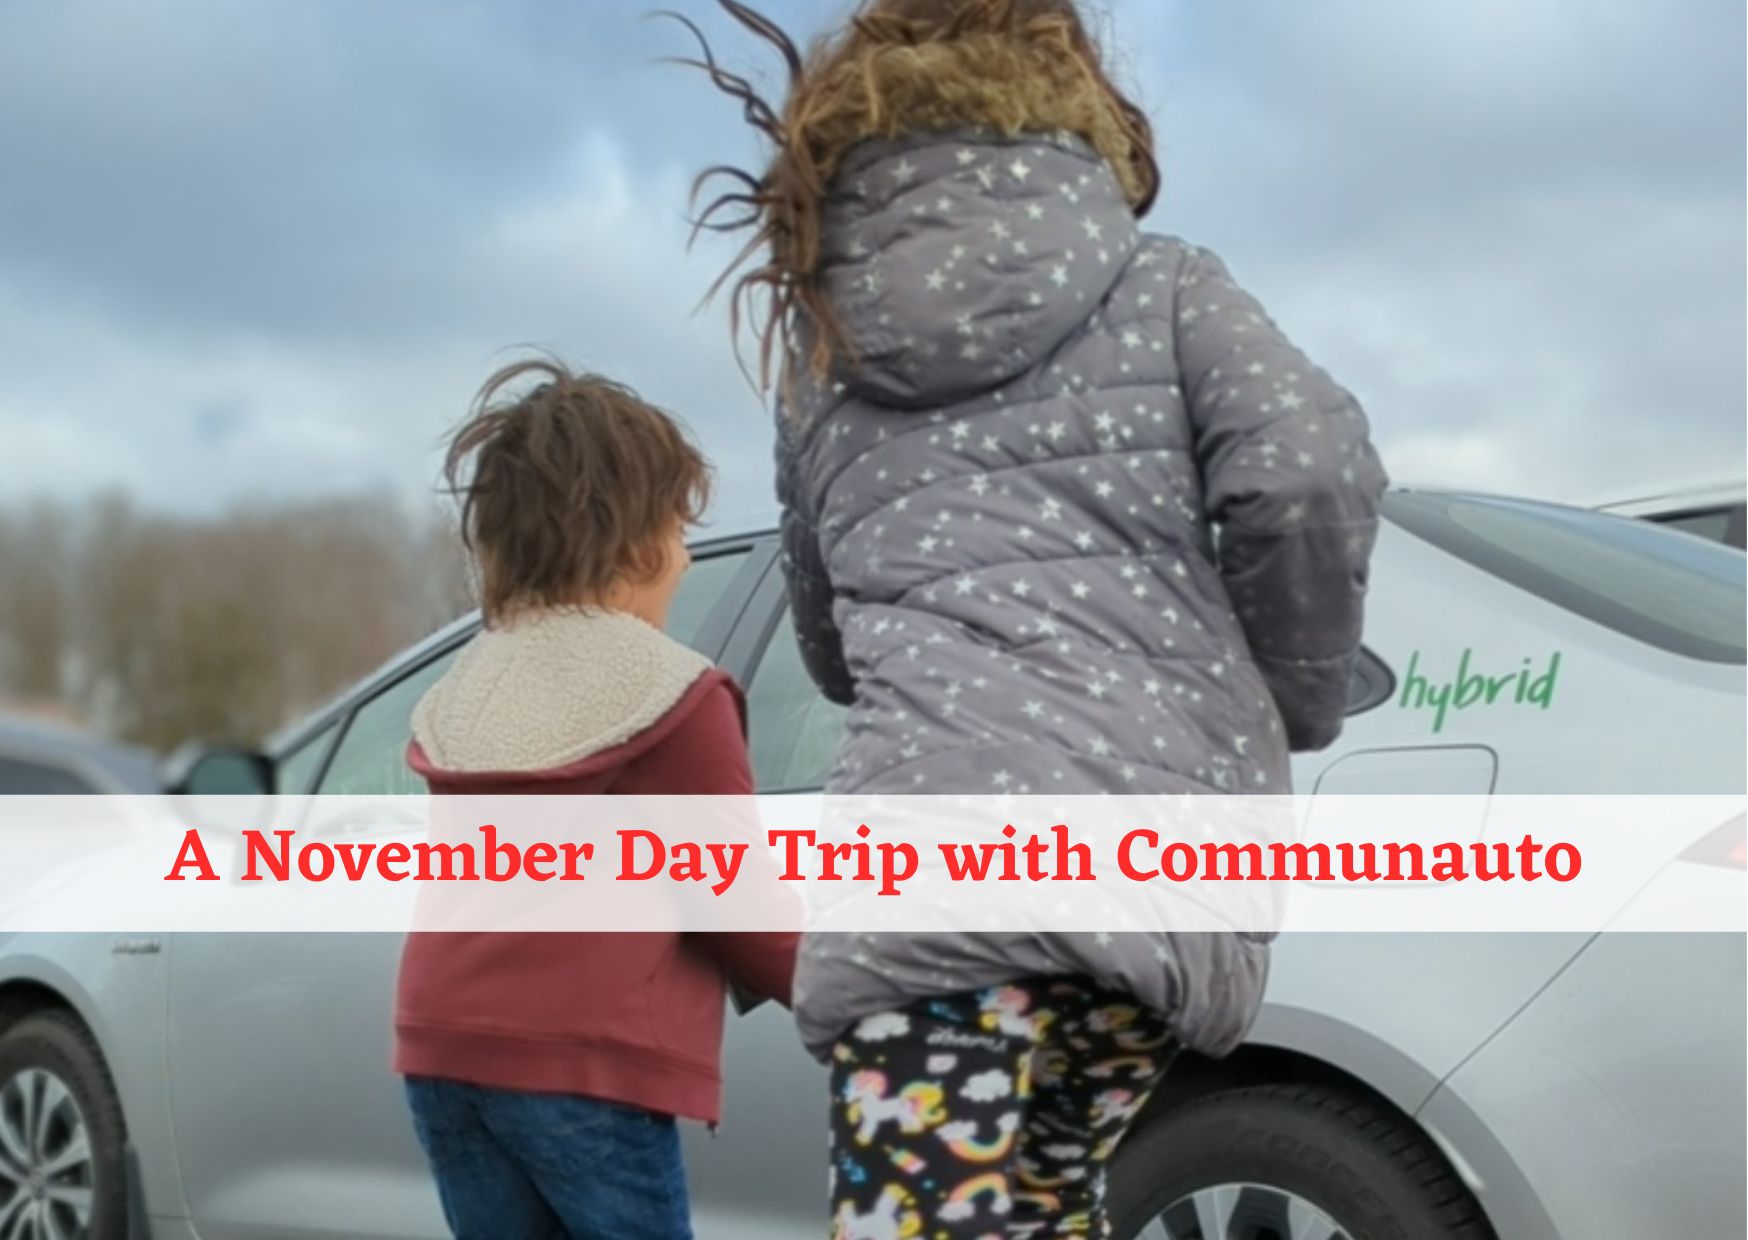 Day trip to YDH with communauto